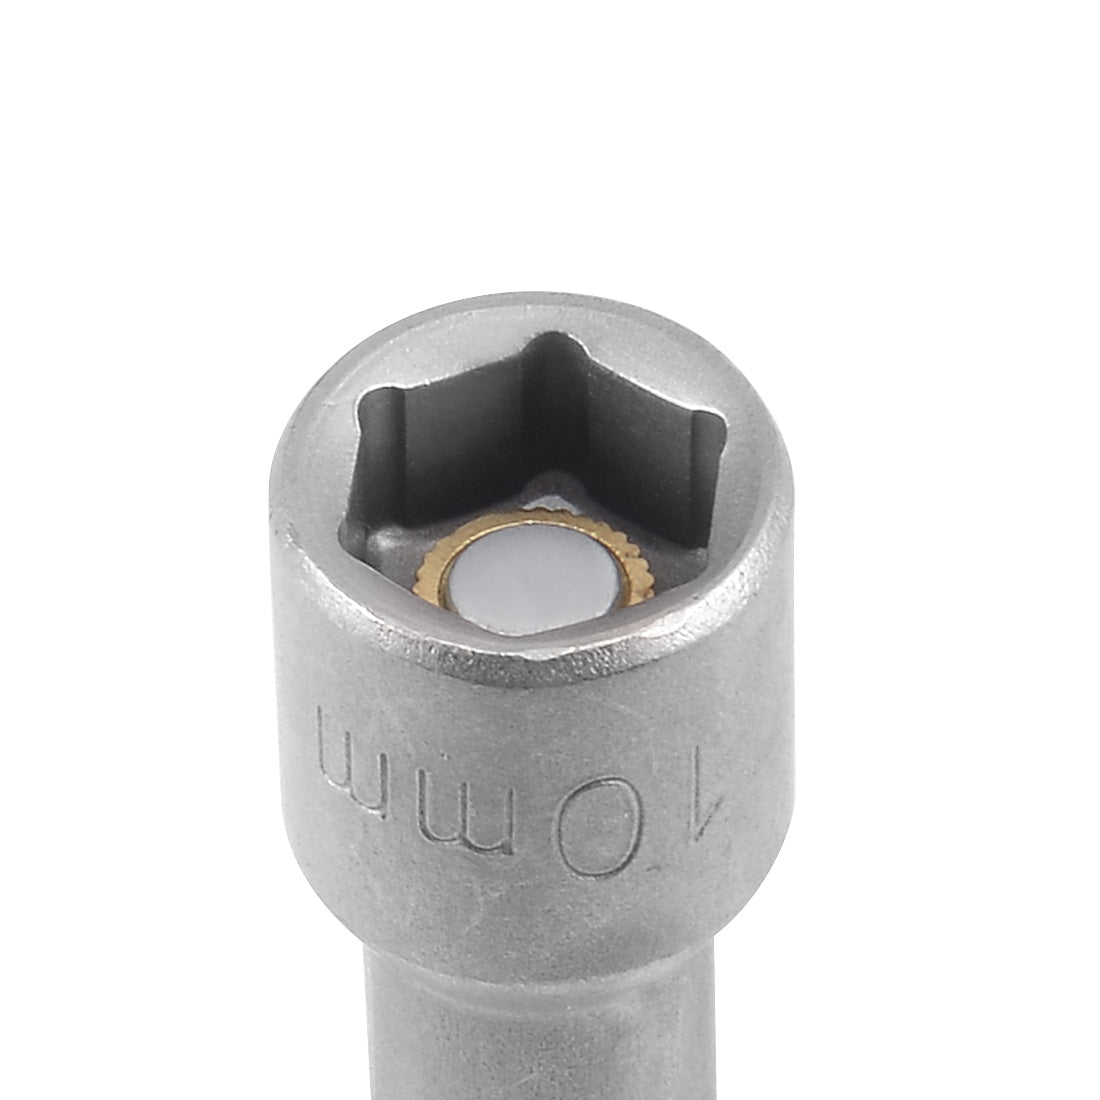 uxcell Uxcell 2 Pcs 1/4" Quick-Change Hex Shank 10mm Magnetic Nut Sockets Driver, 65mm Length